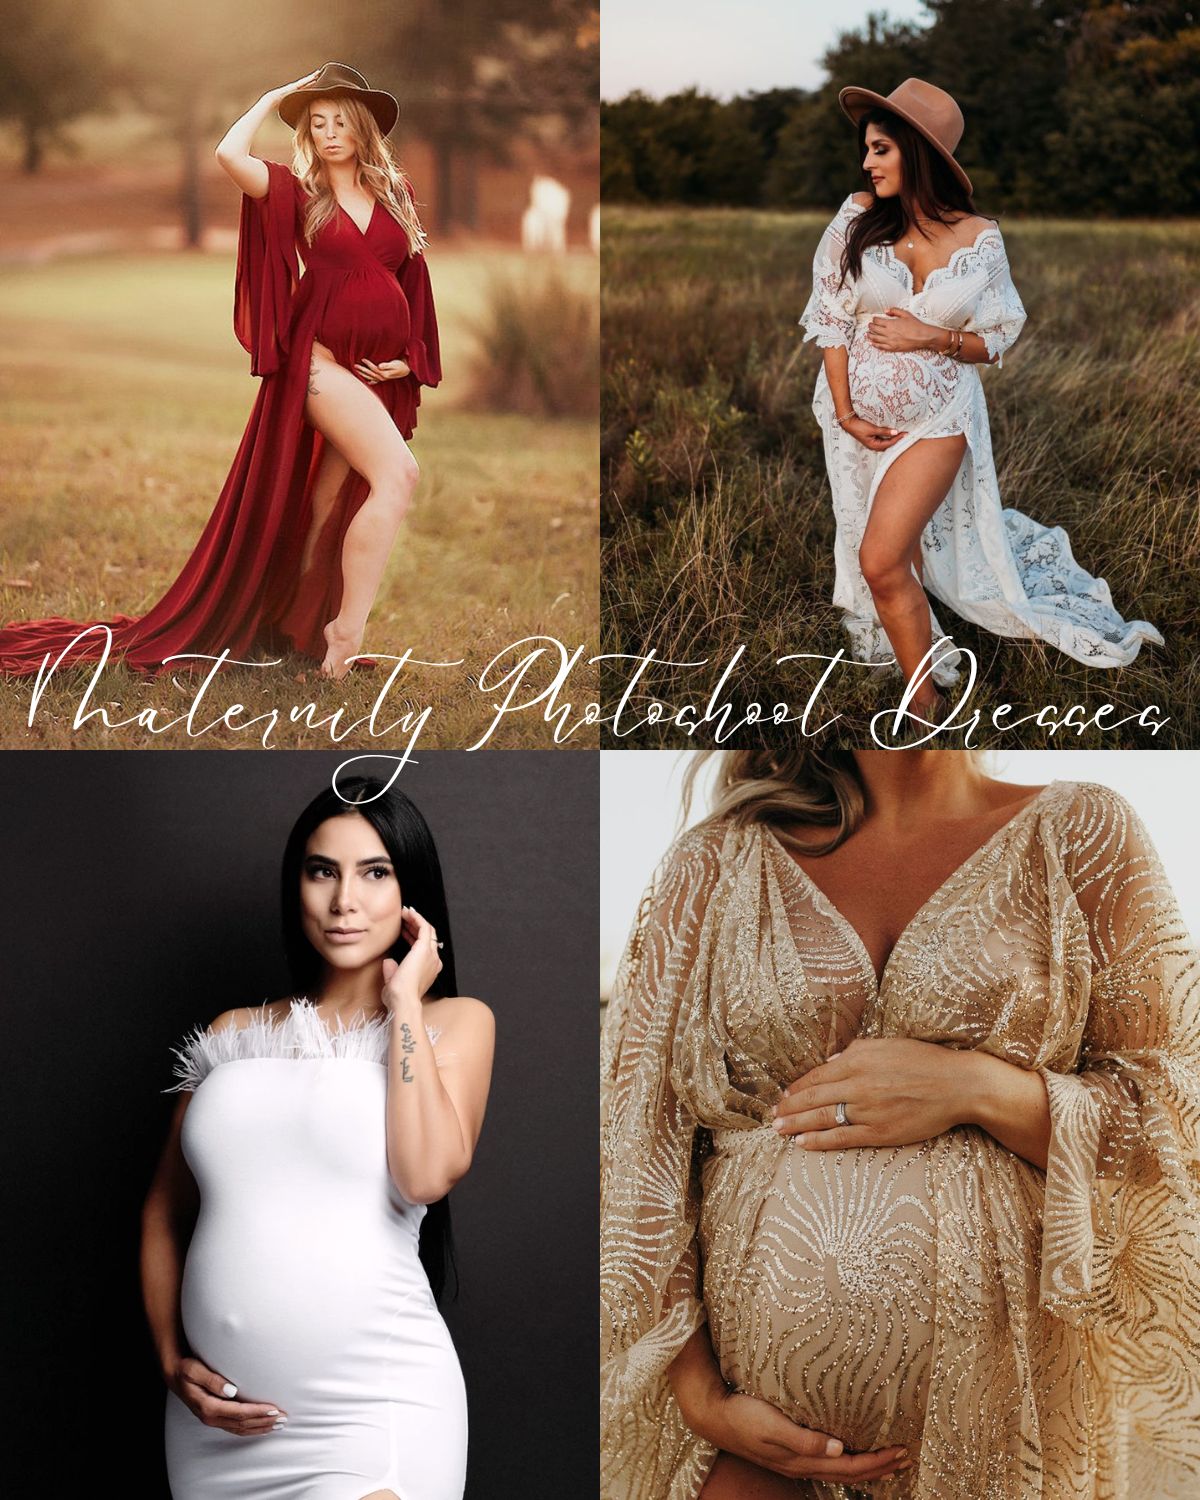 Four pregnant women in maternity photoshoot outfit ideas